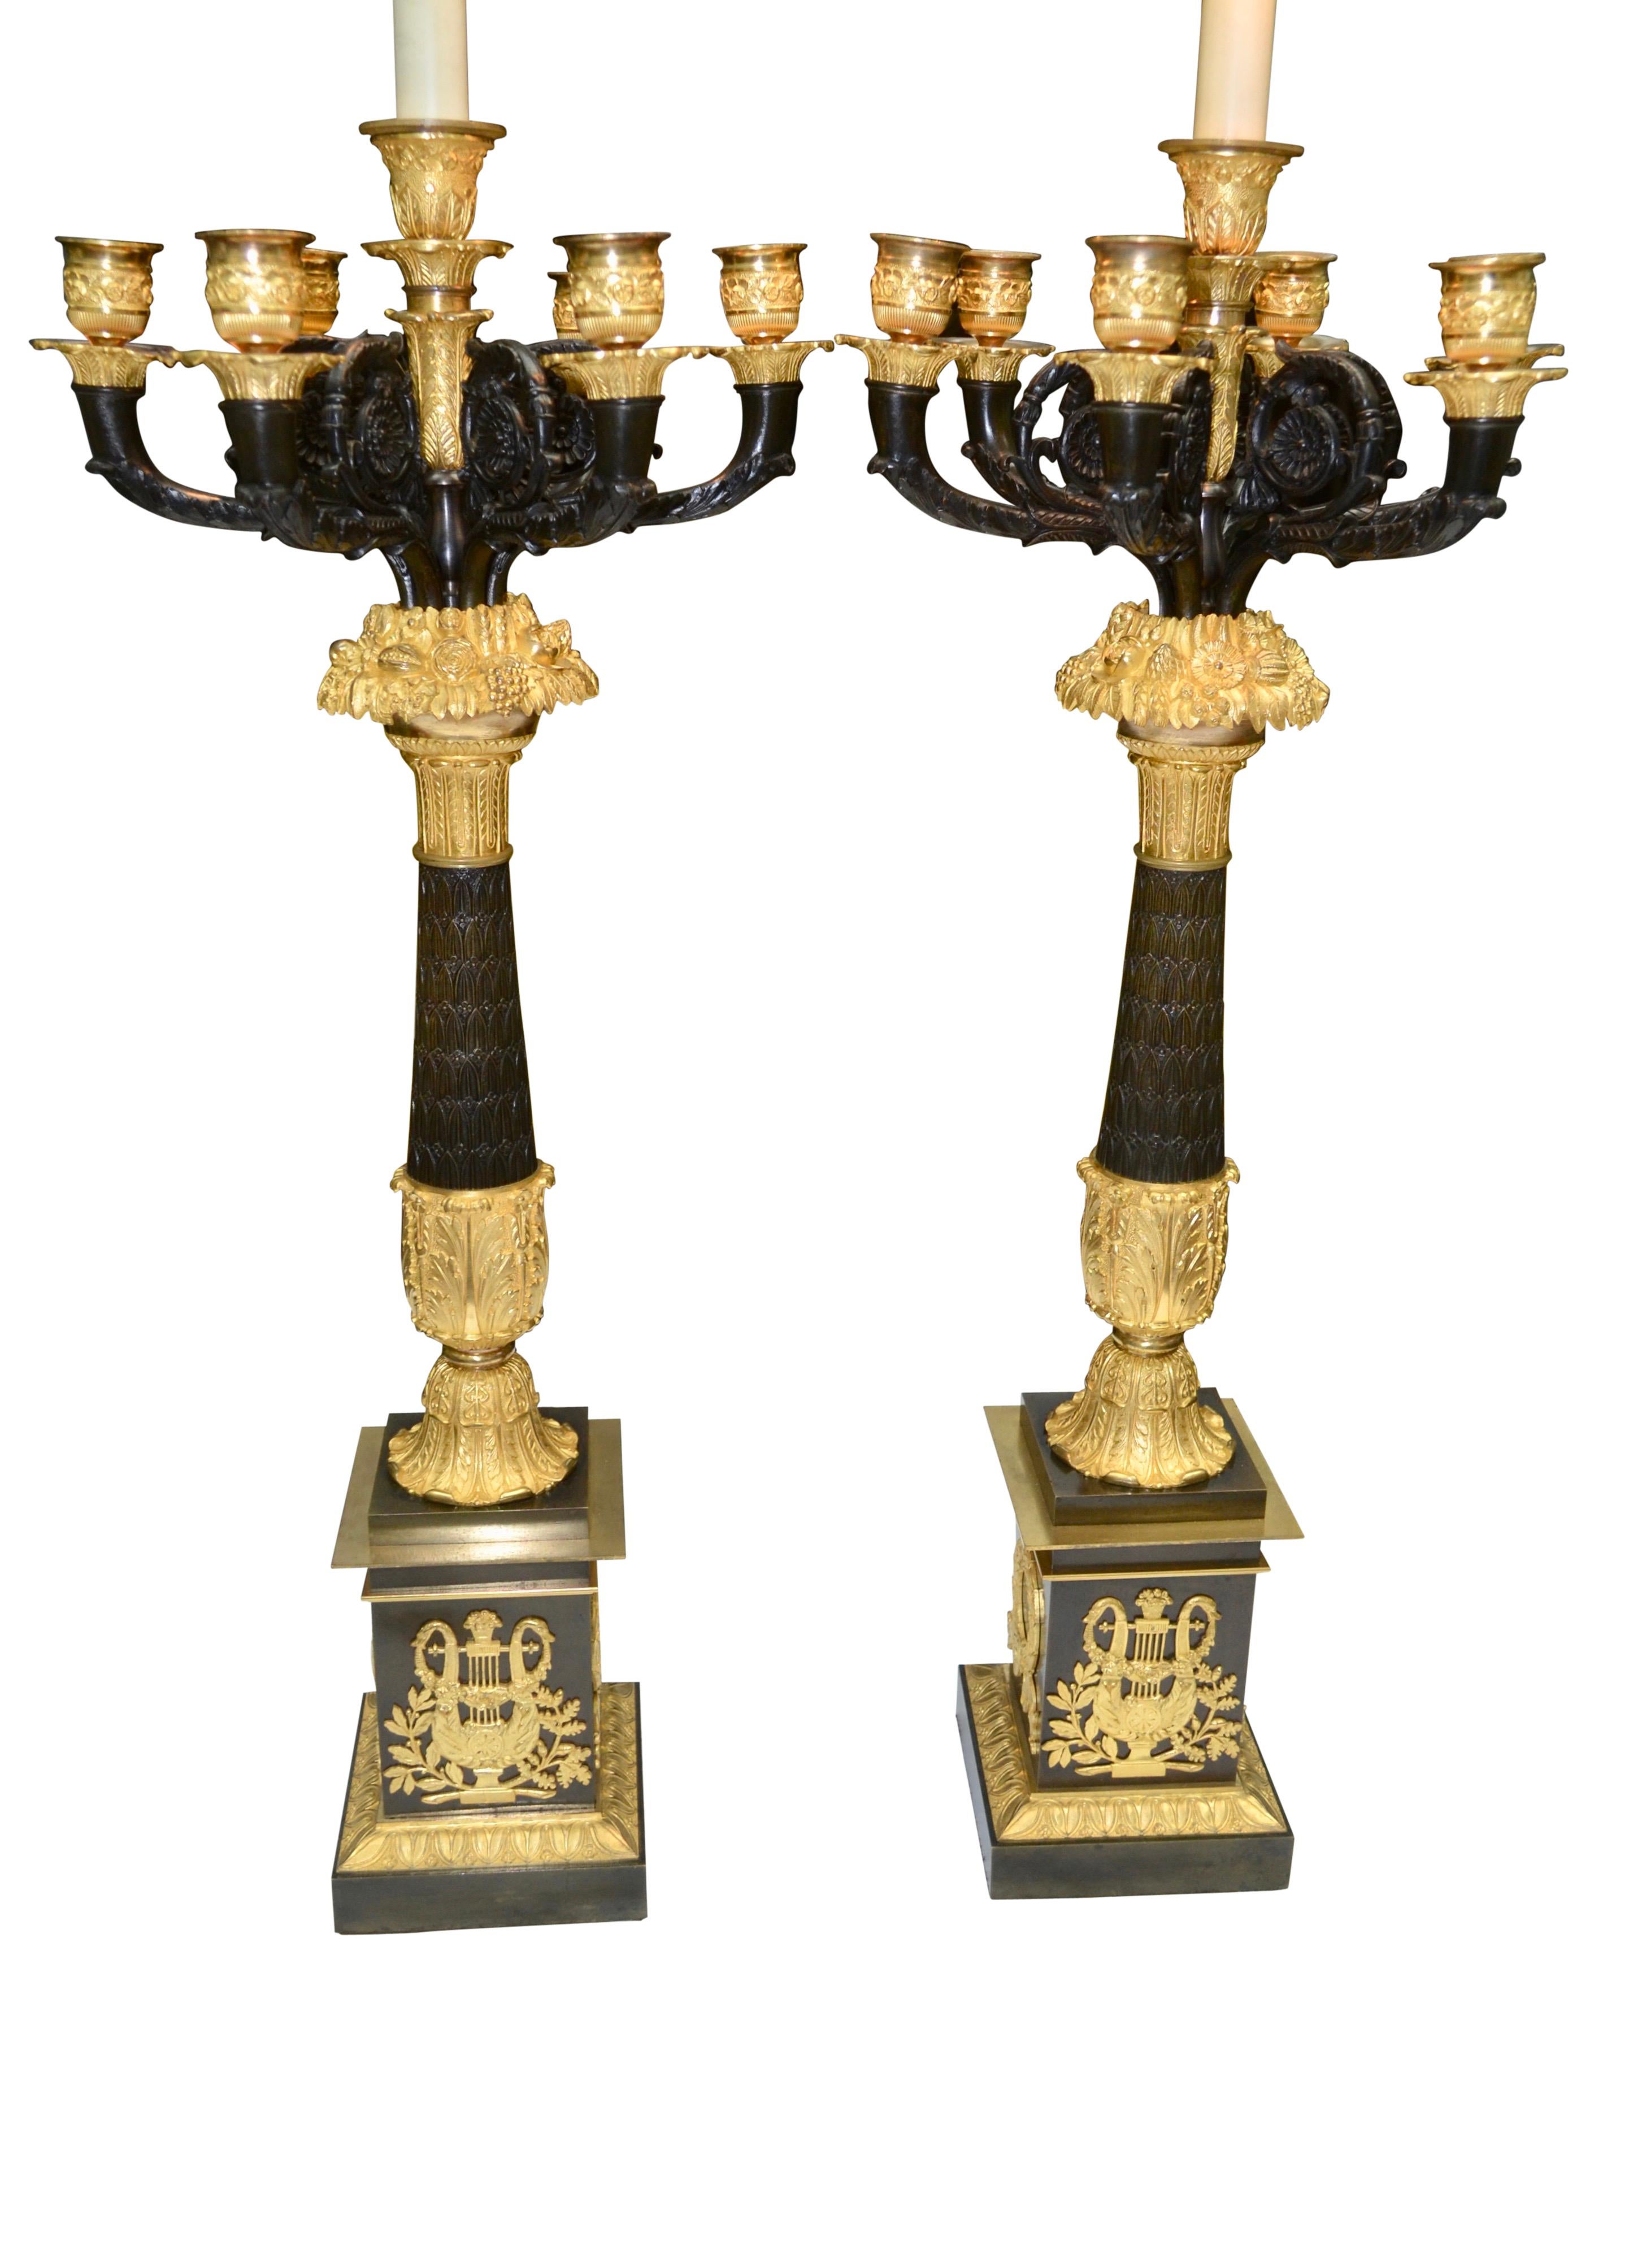 A pair of French Empire candelabra/lamps of the finest quality patinated and gilt bronze, likely the work of the one of the preeminent Parisienne bronziers perhaps Galle or Thomire. The central patinated column decorated with leaves and flowers is